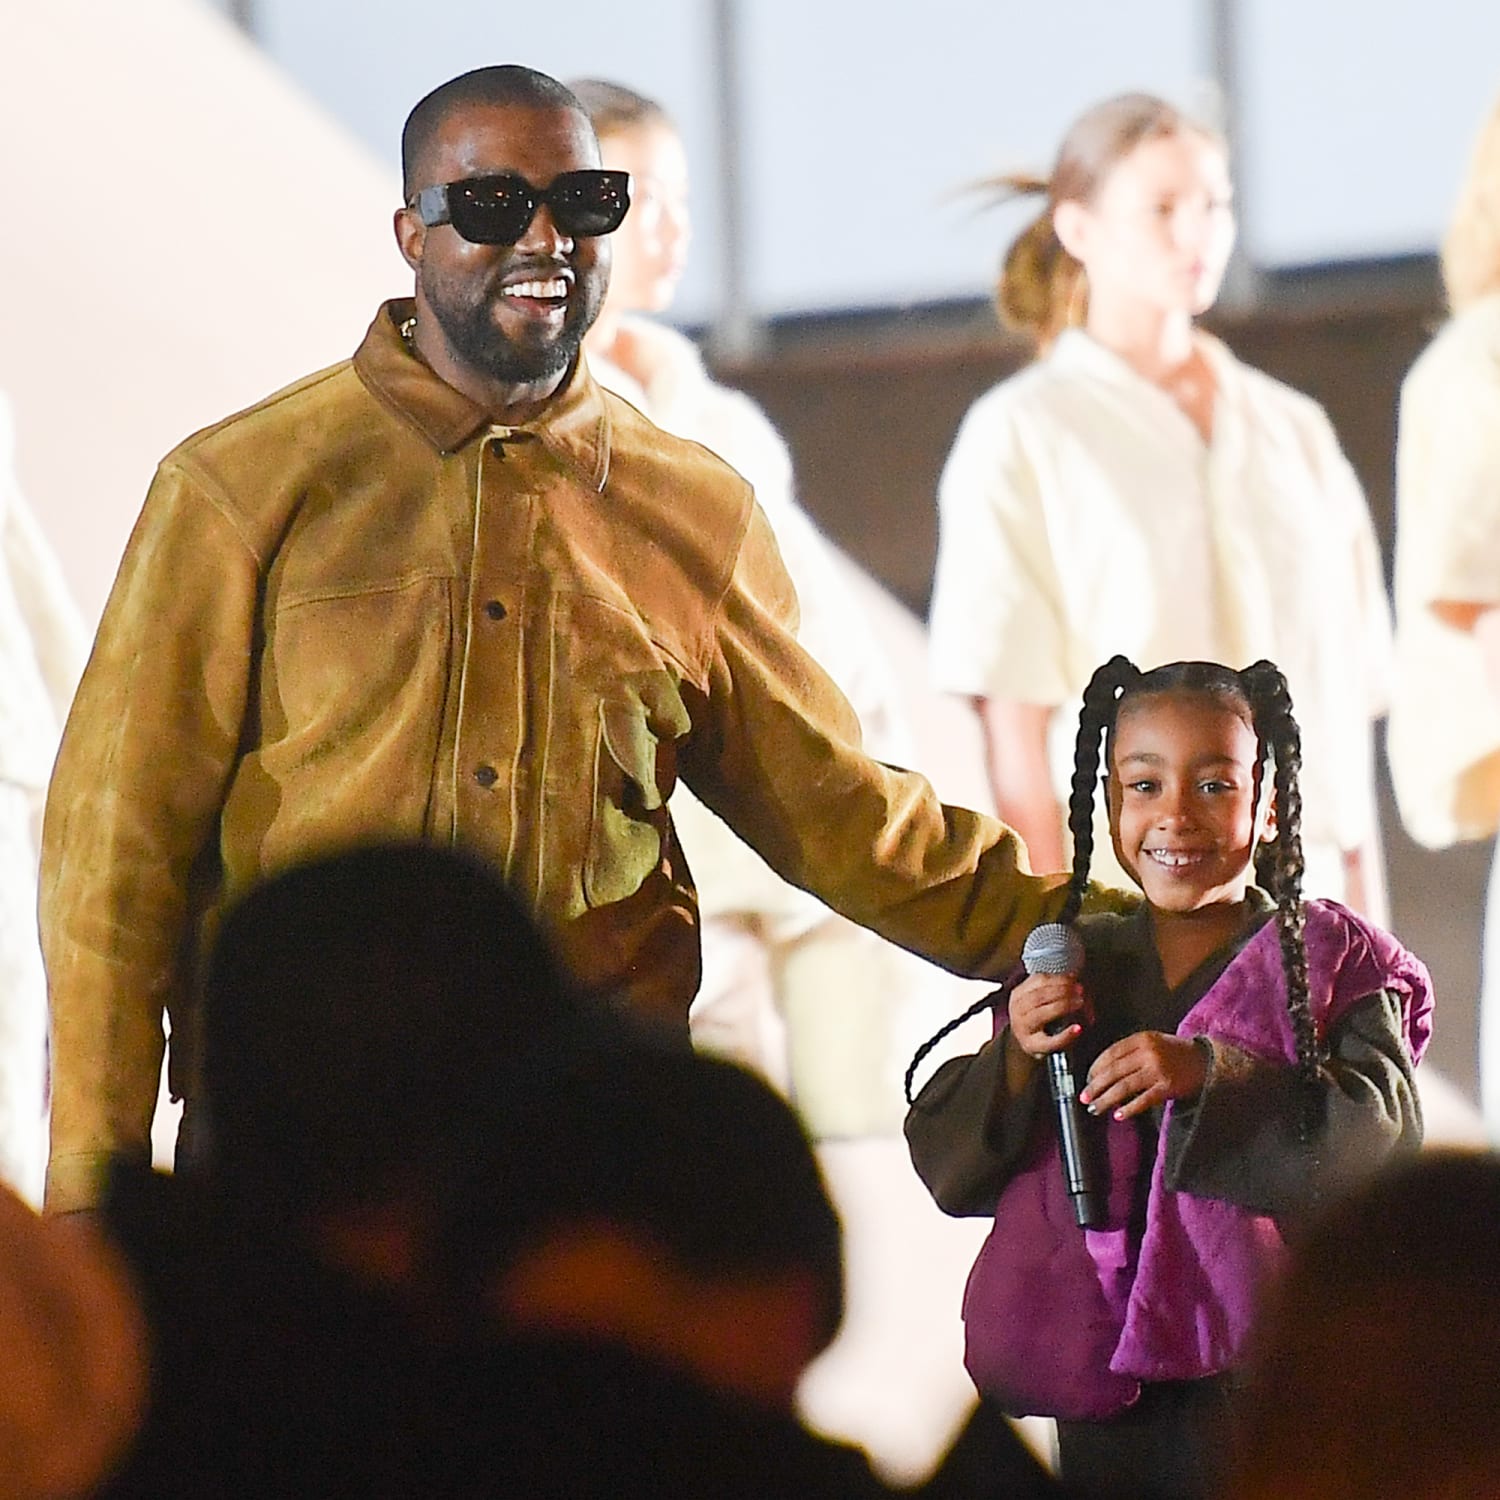 Kim Kardashian laughs as Kanye West and daughter North West dance